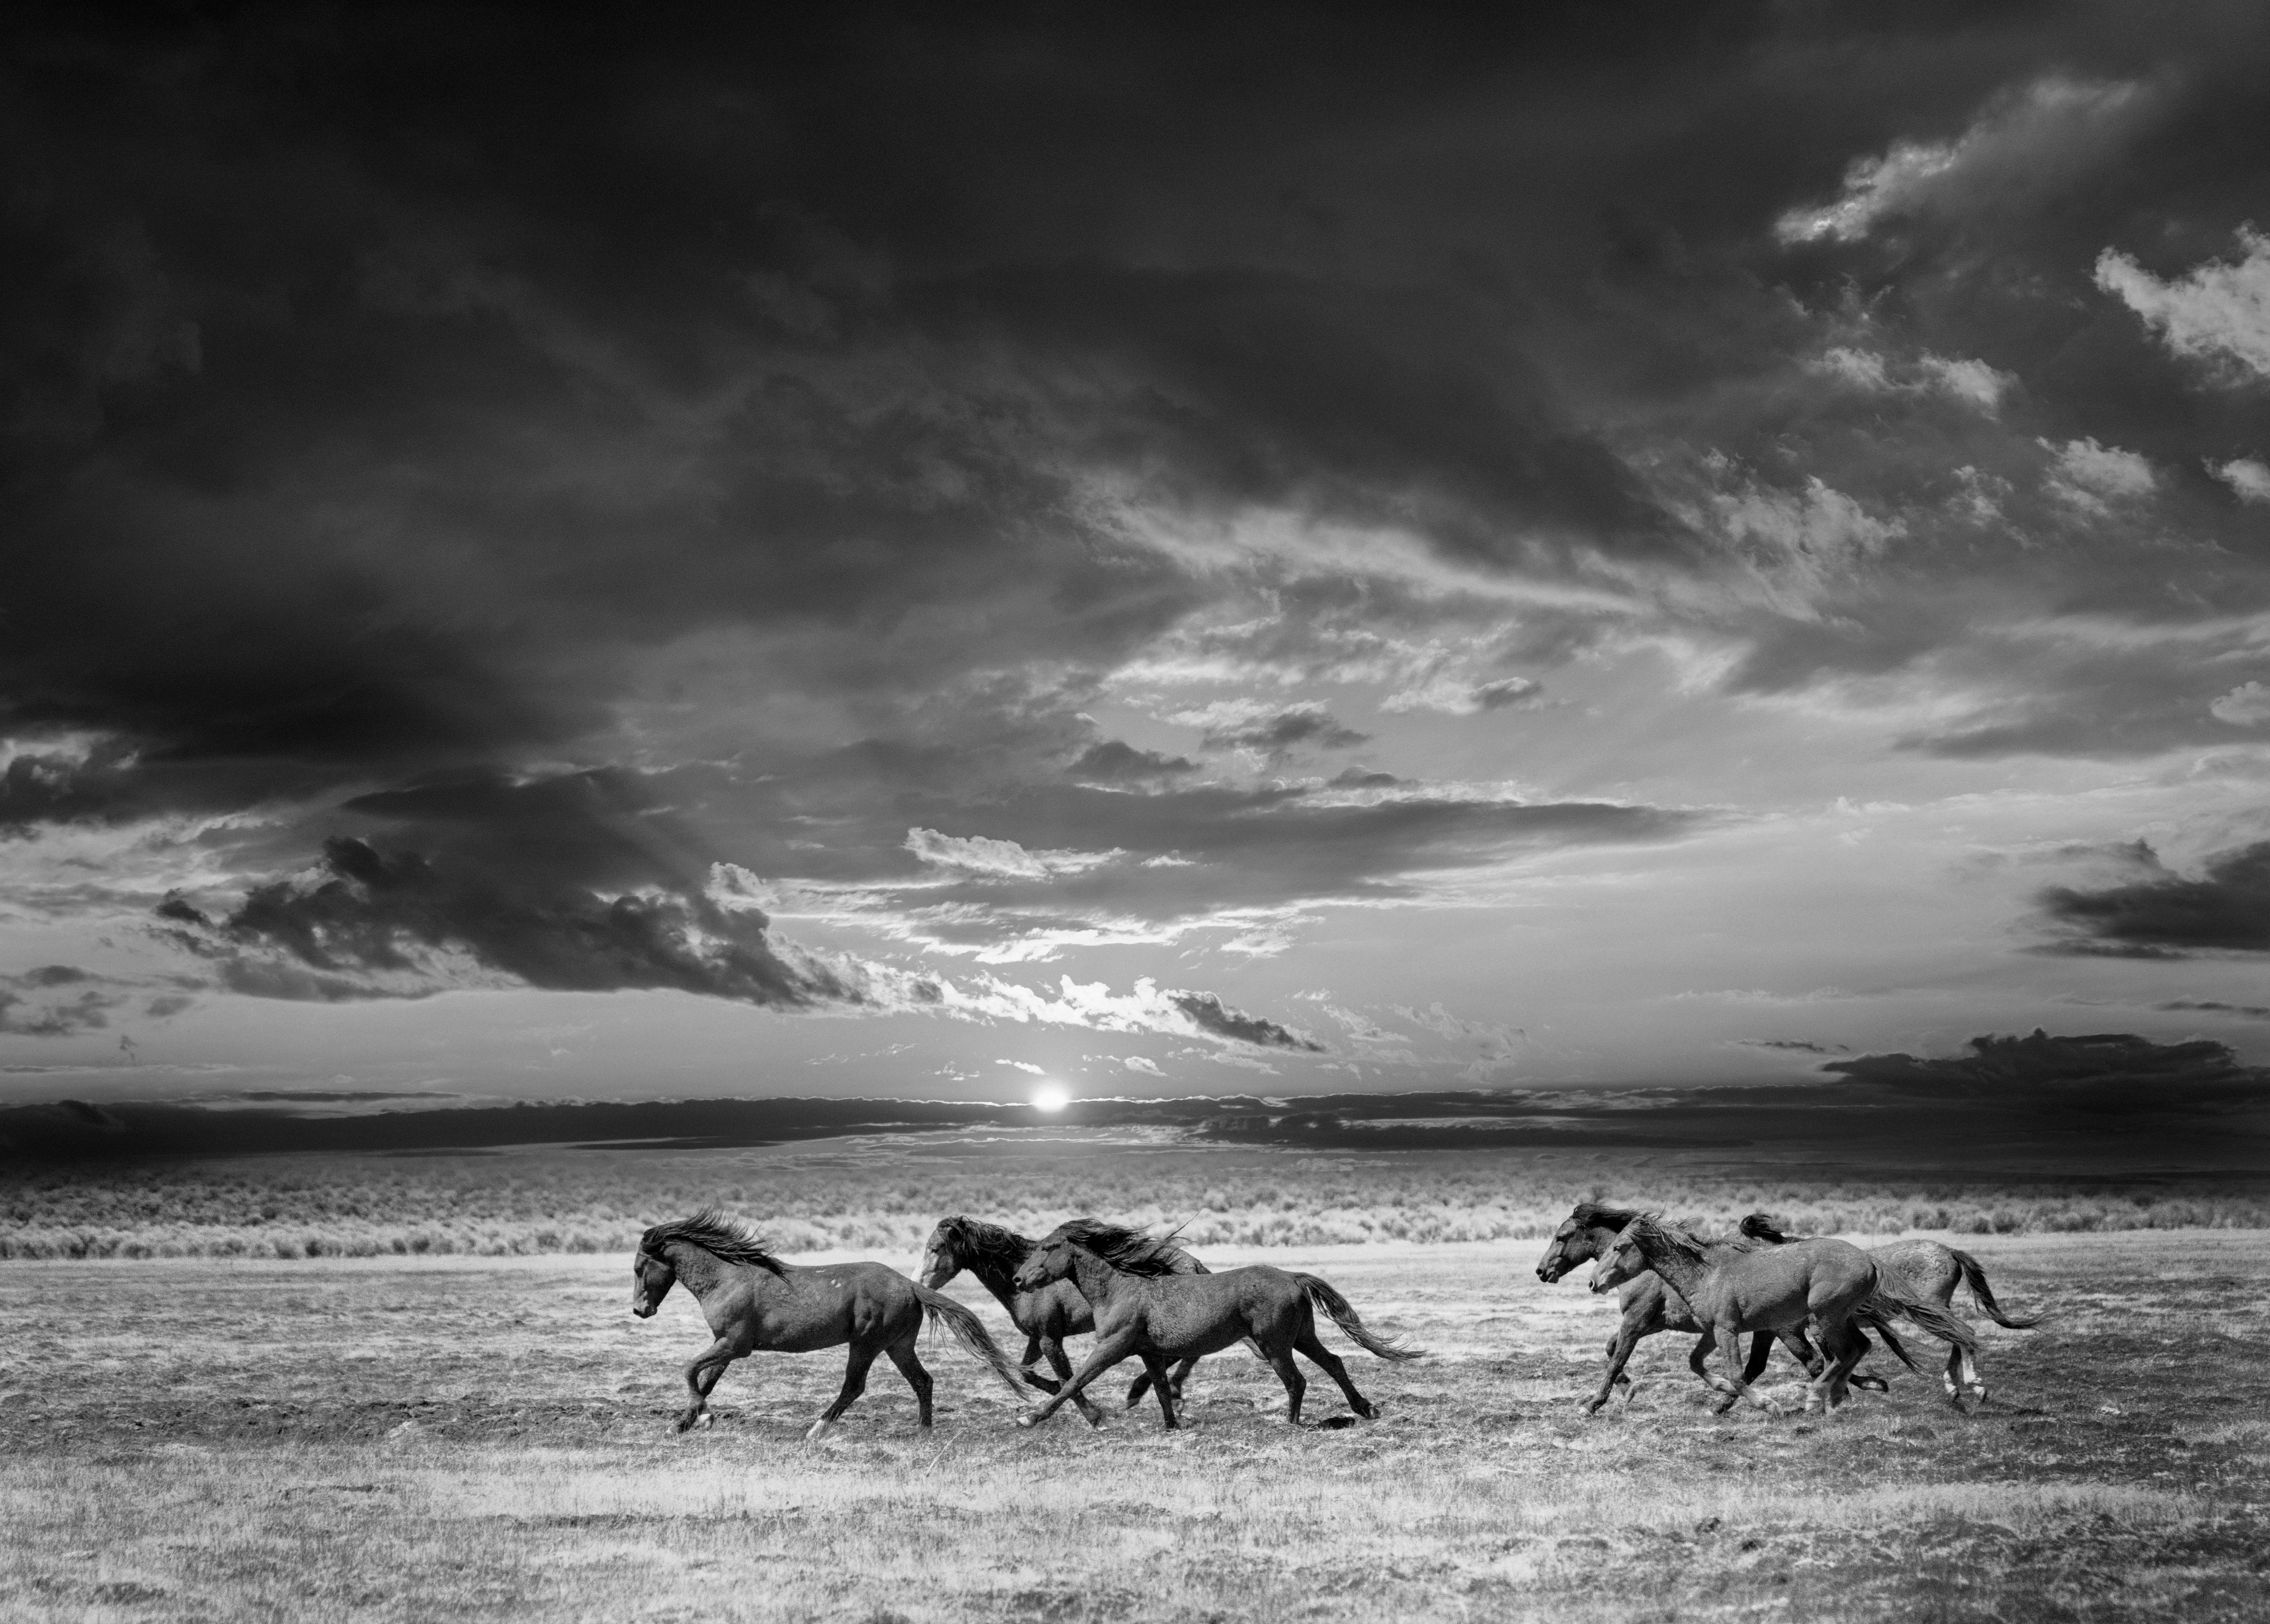 Black and White Photograph Shane Russeck - Chasing the Light- 60x40 Photographie noir et blanc Chevaux sauvages Mustangs Non signé